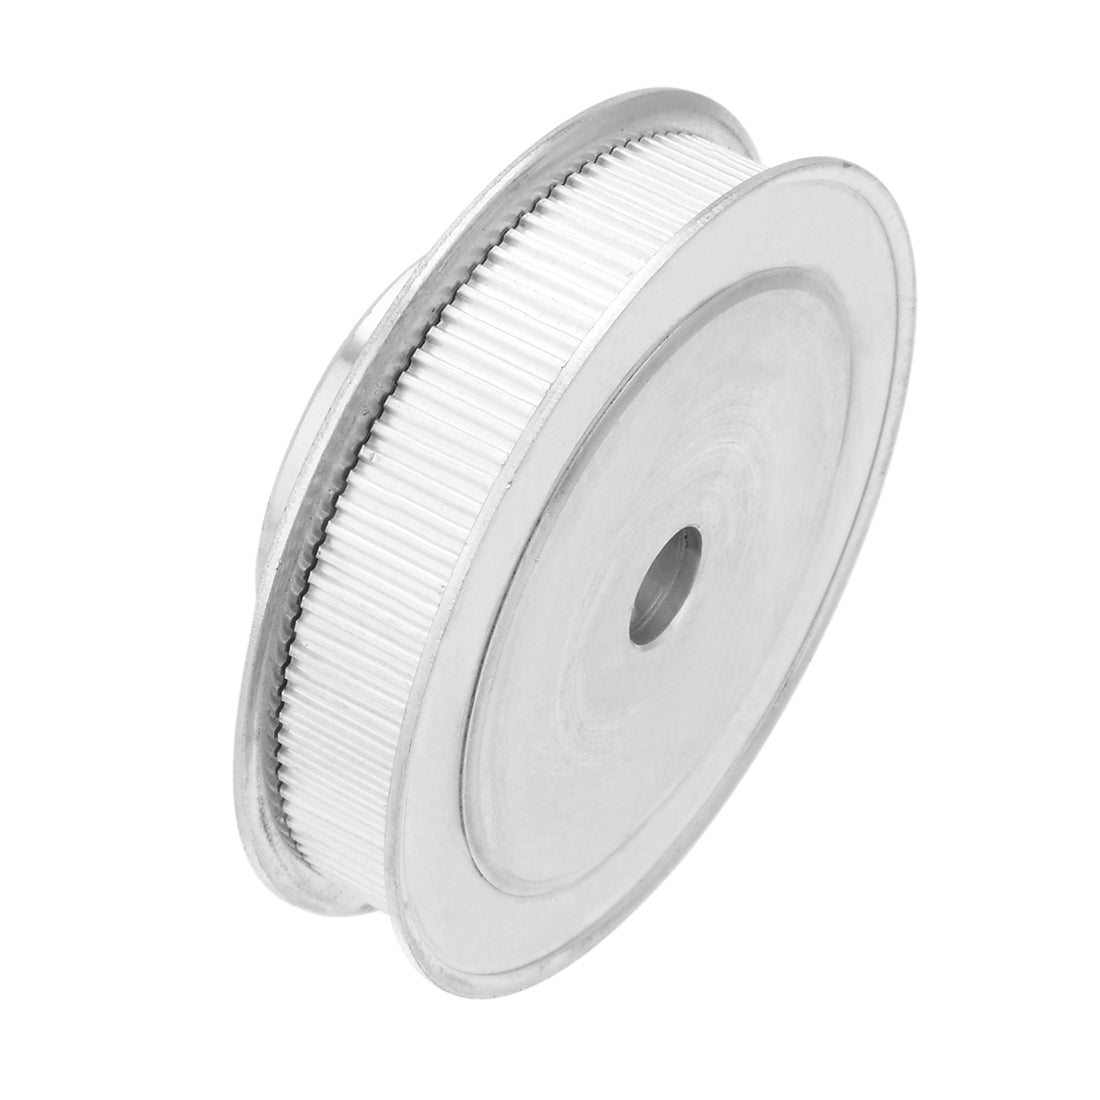 uxcell Uxcell Aluminum 100 Teeth 10mm Bore 2.032mm Pitch Timing Belt Pulley for 10mm Belt